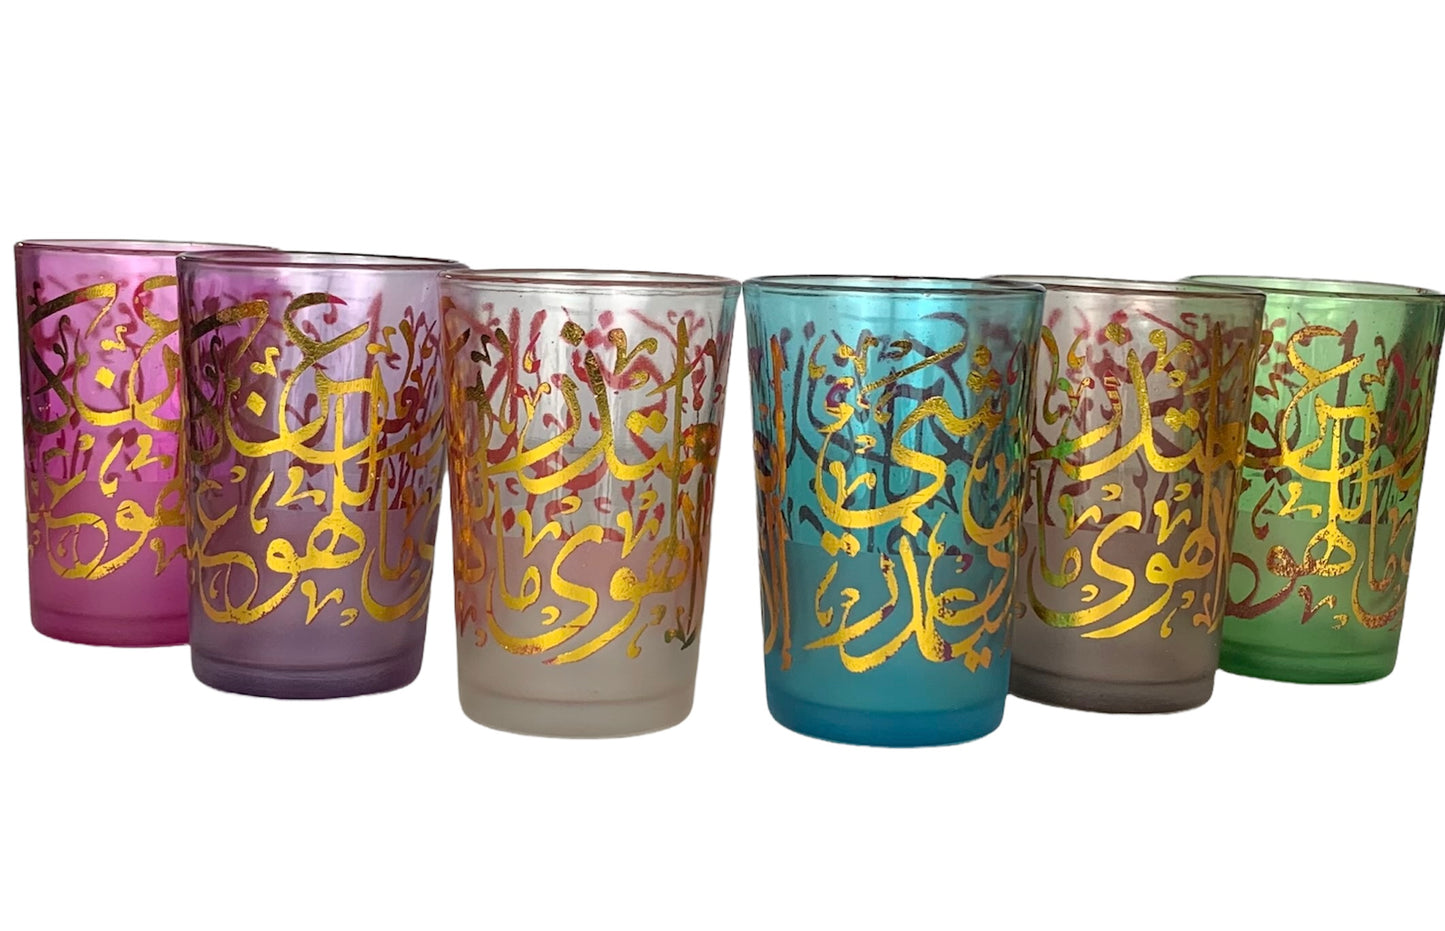 Arabesque Moroccan Tea Glasses, Moroccan Drinking Glasses – Pack Of 6 – Unique and Stylish – Handmade Traditional Glass Set – For Tea, Coffee, Juice, Water, Etc. - Marrakesh Gardens